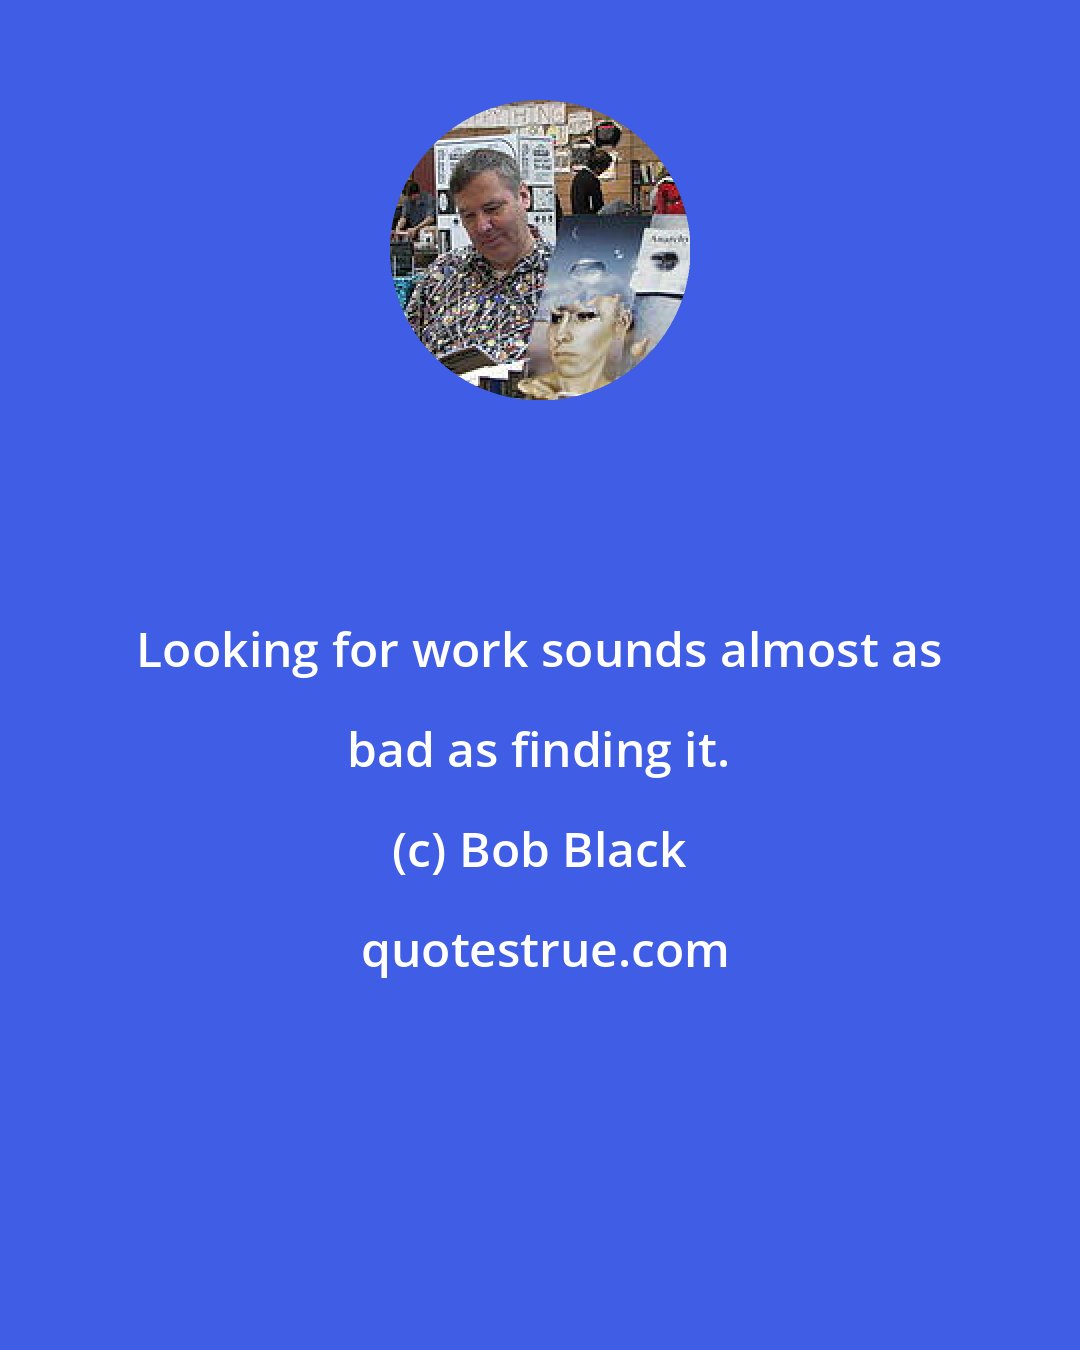 Bob Black: Looking for work sounds almost as bad as finding it.